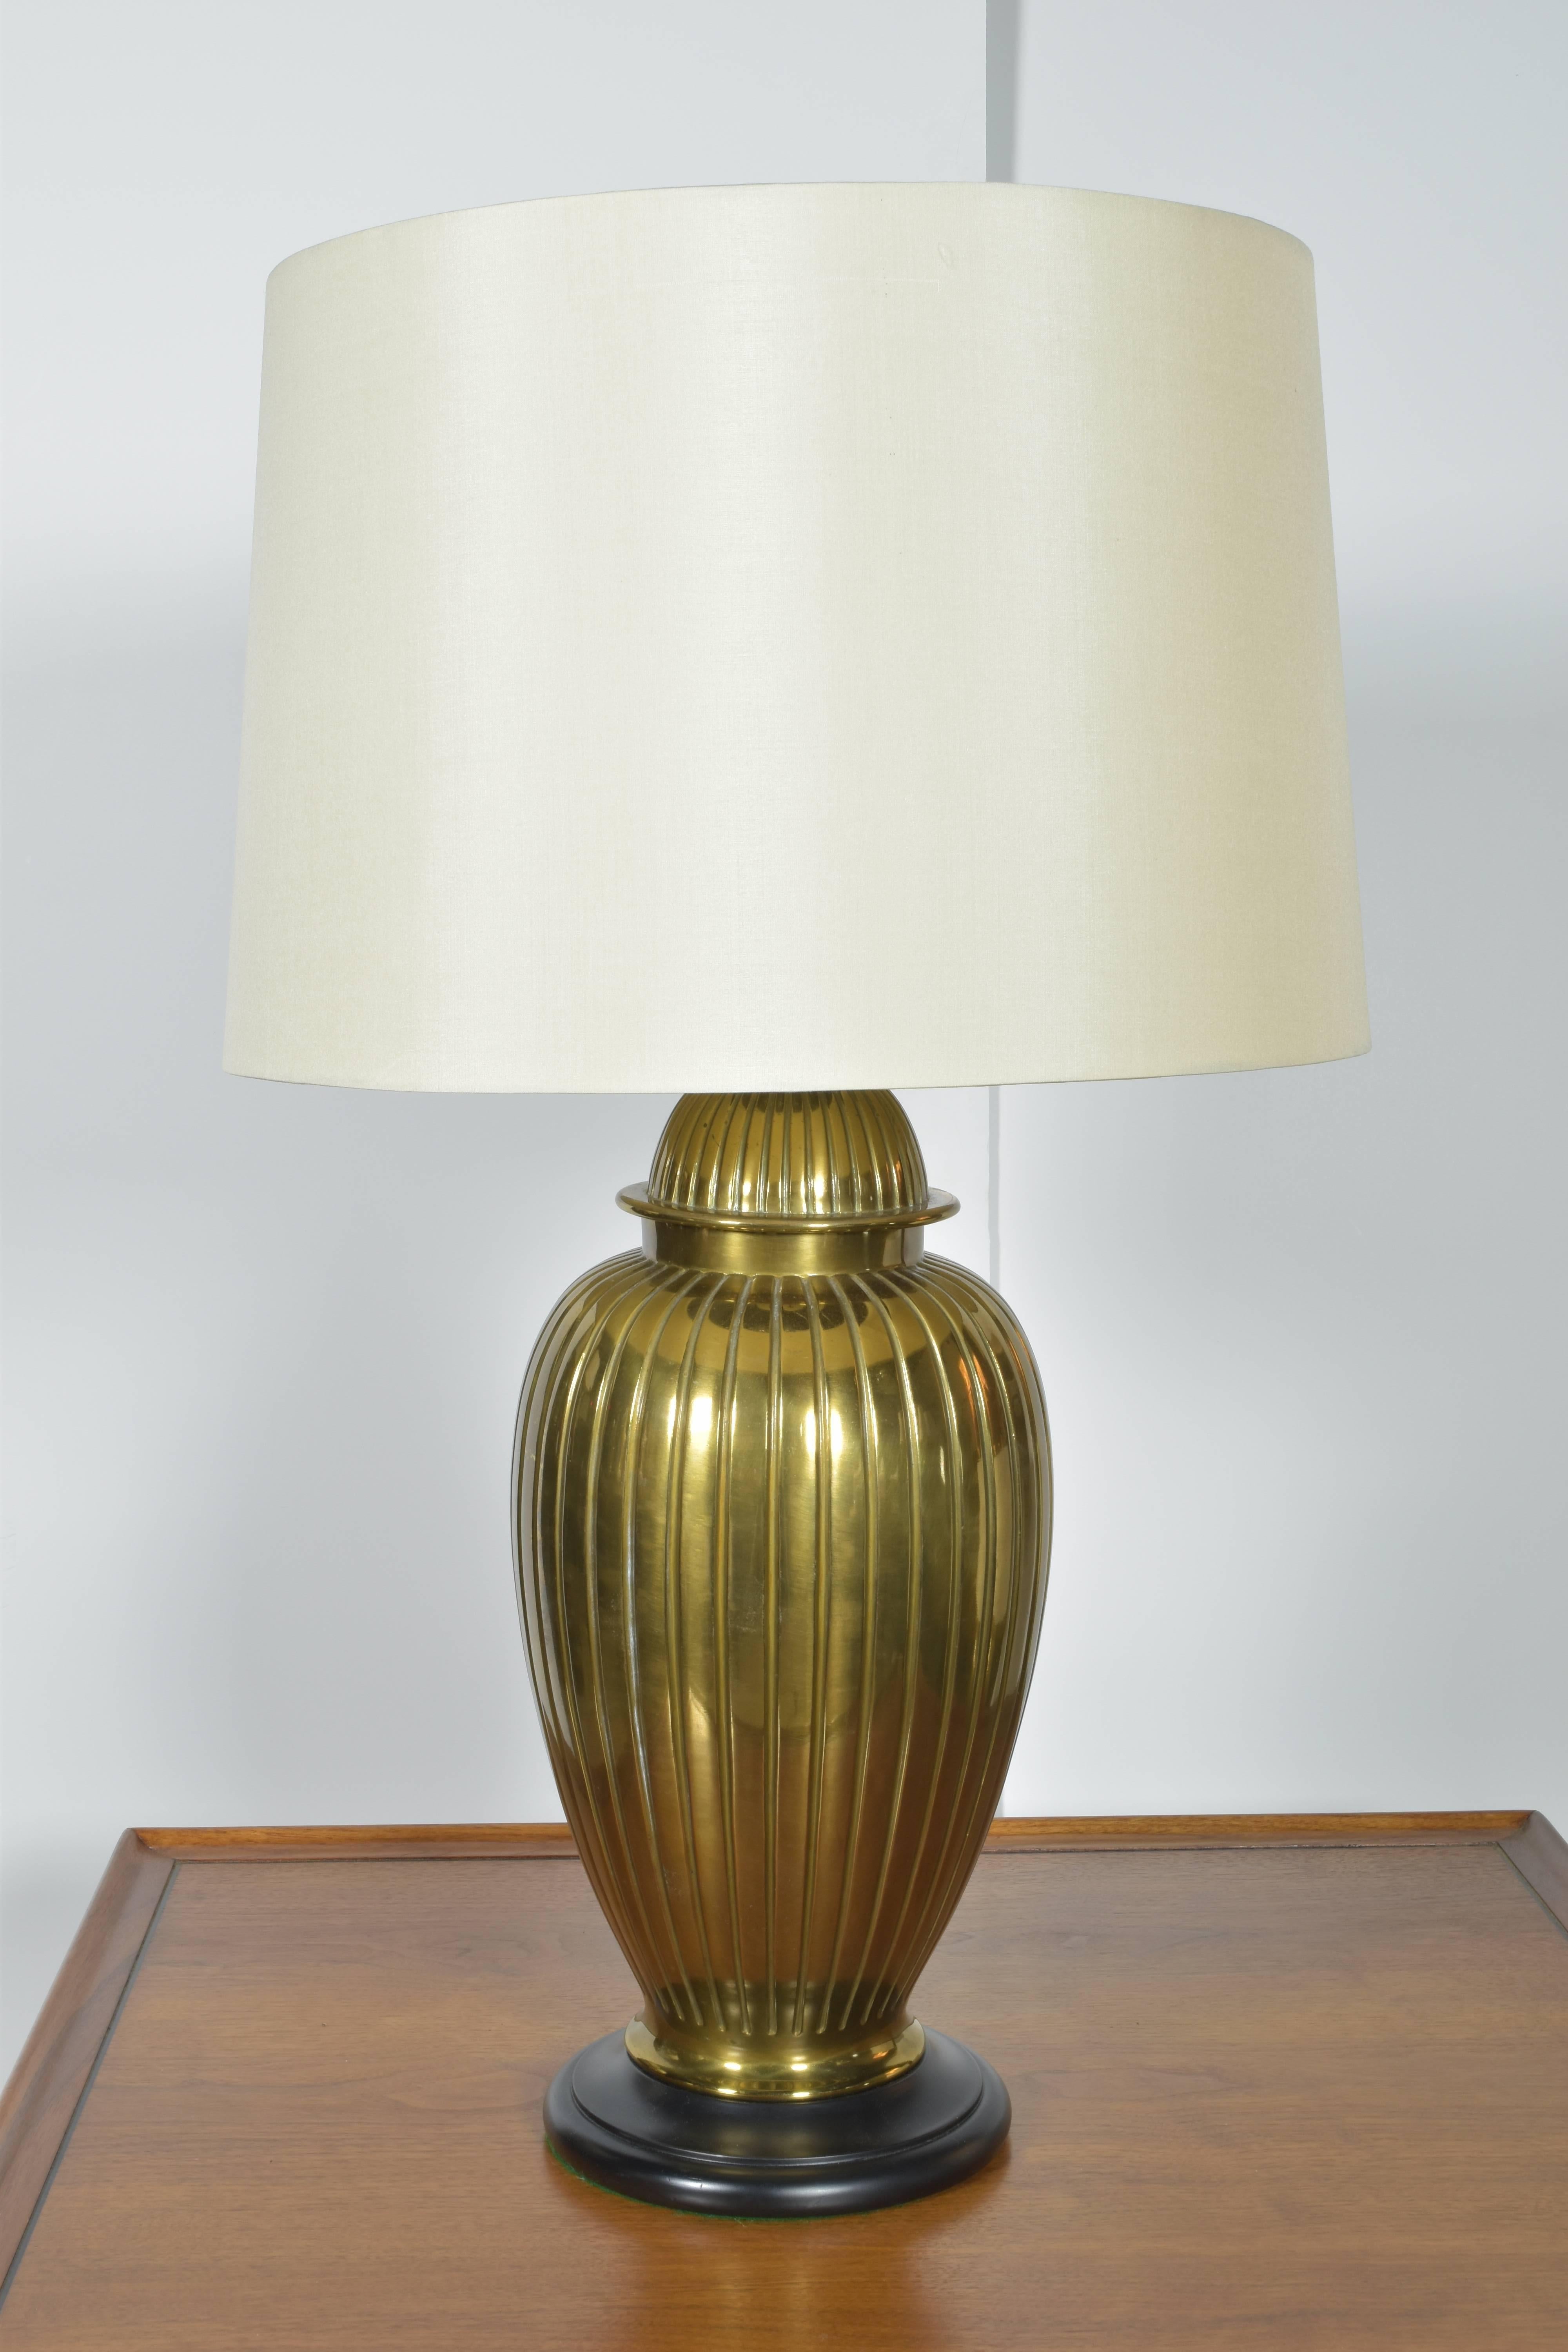 Large pair of brass urn form lamps on wooden bases.